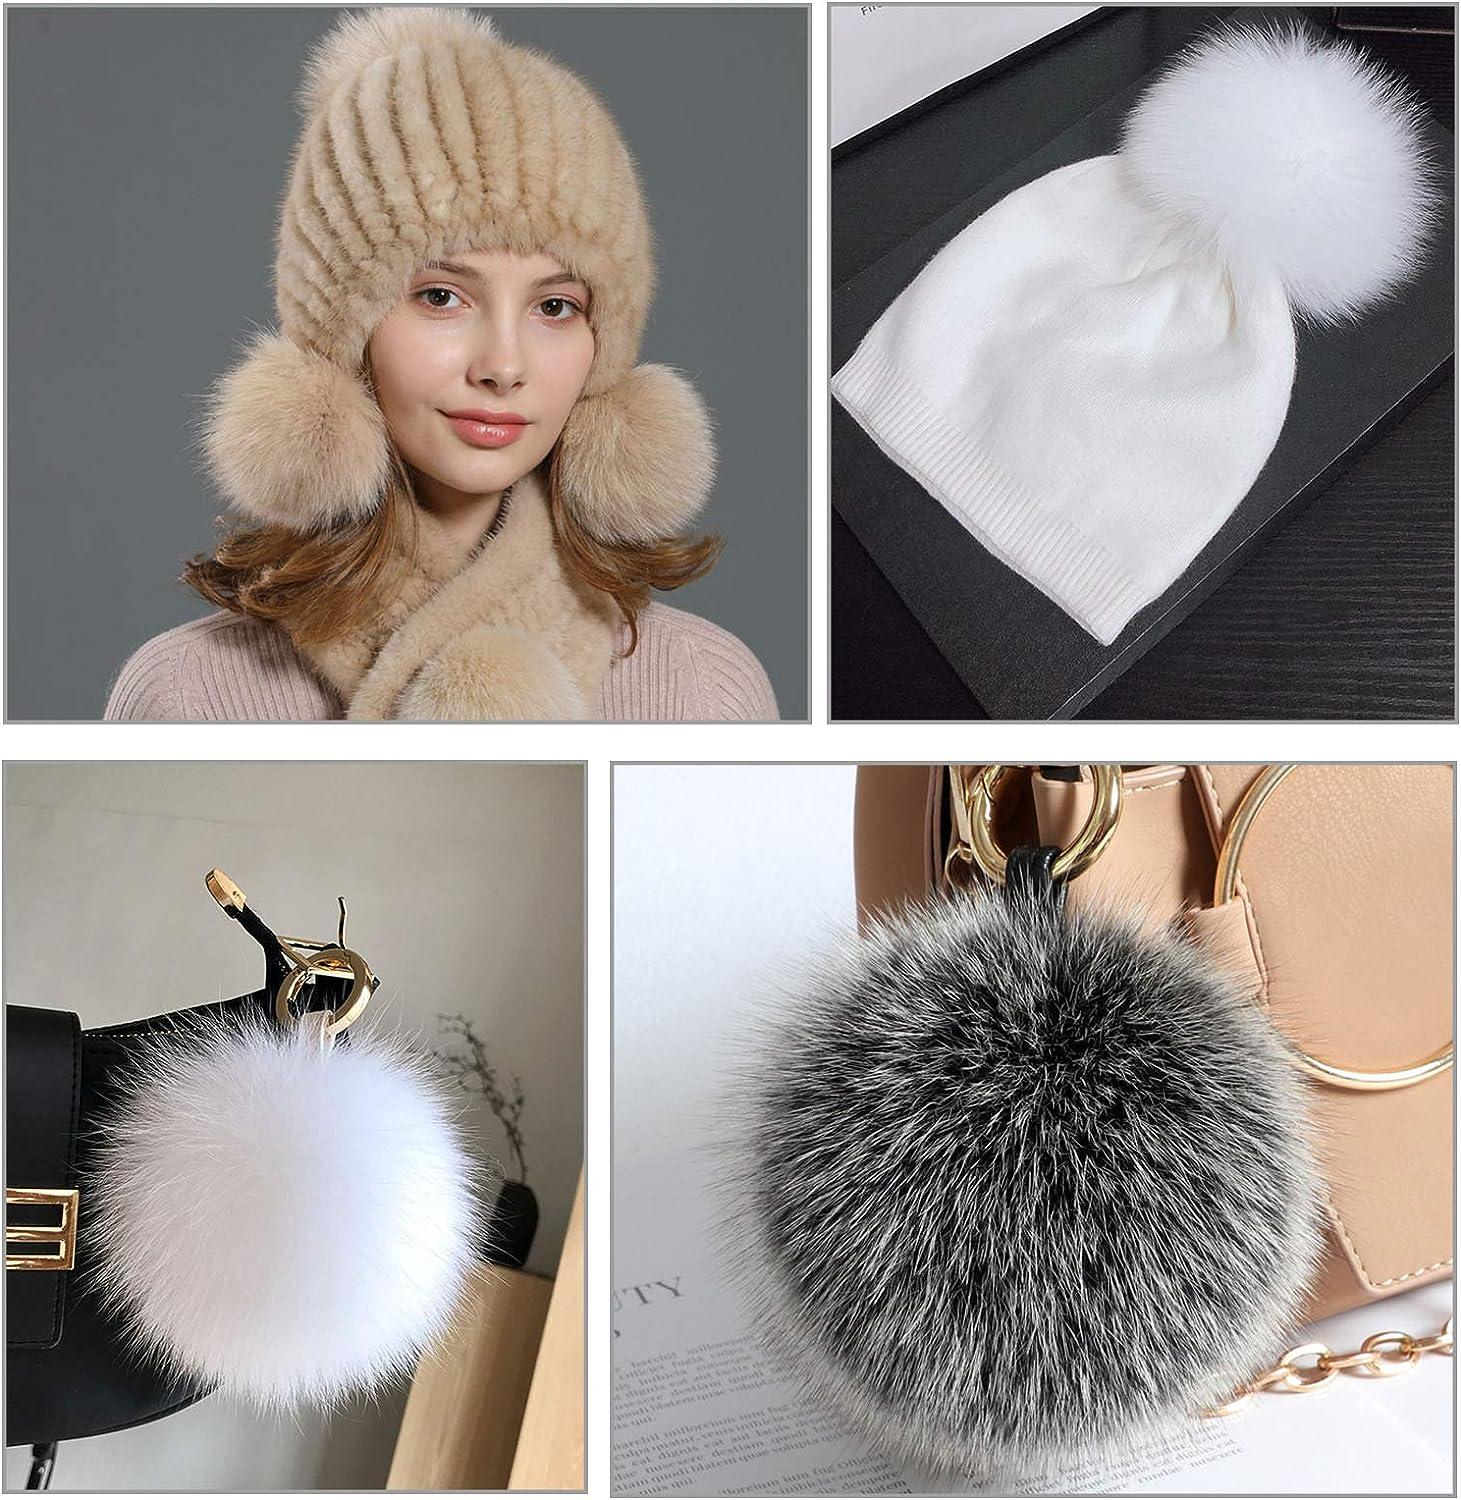 Etomiel 6 Inch Large Faux Fur Pompoms, 10 Pcs Pompoms for Hats with Elastic  Loop for DIY Crafts, Removable Knitting Accessories poms for Beanies